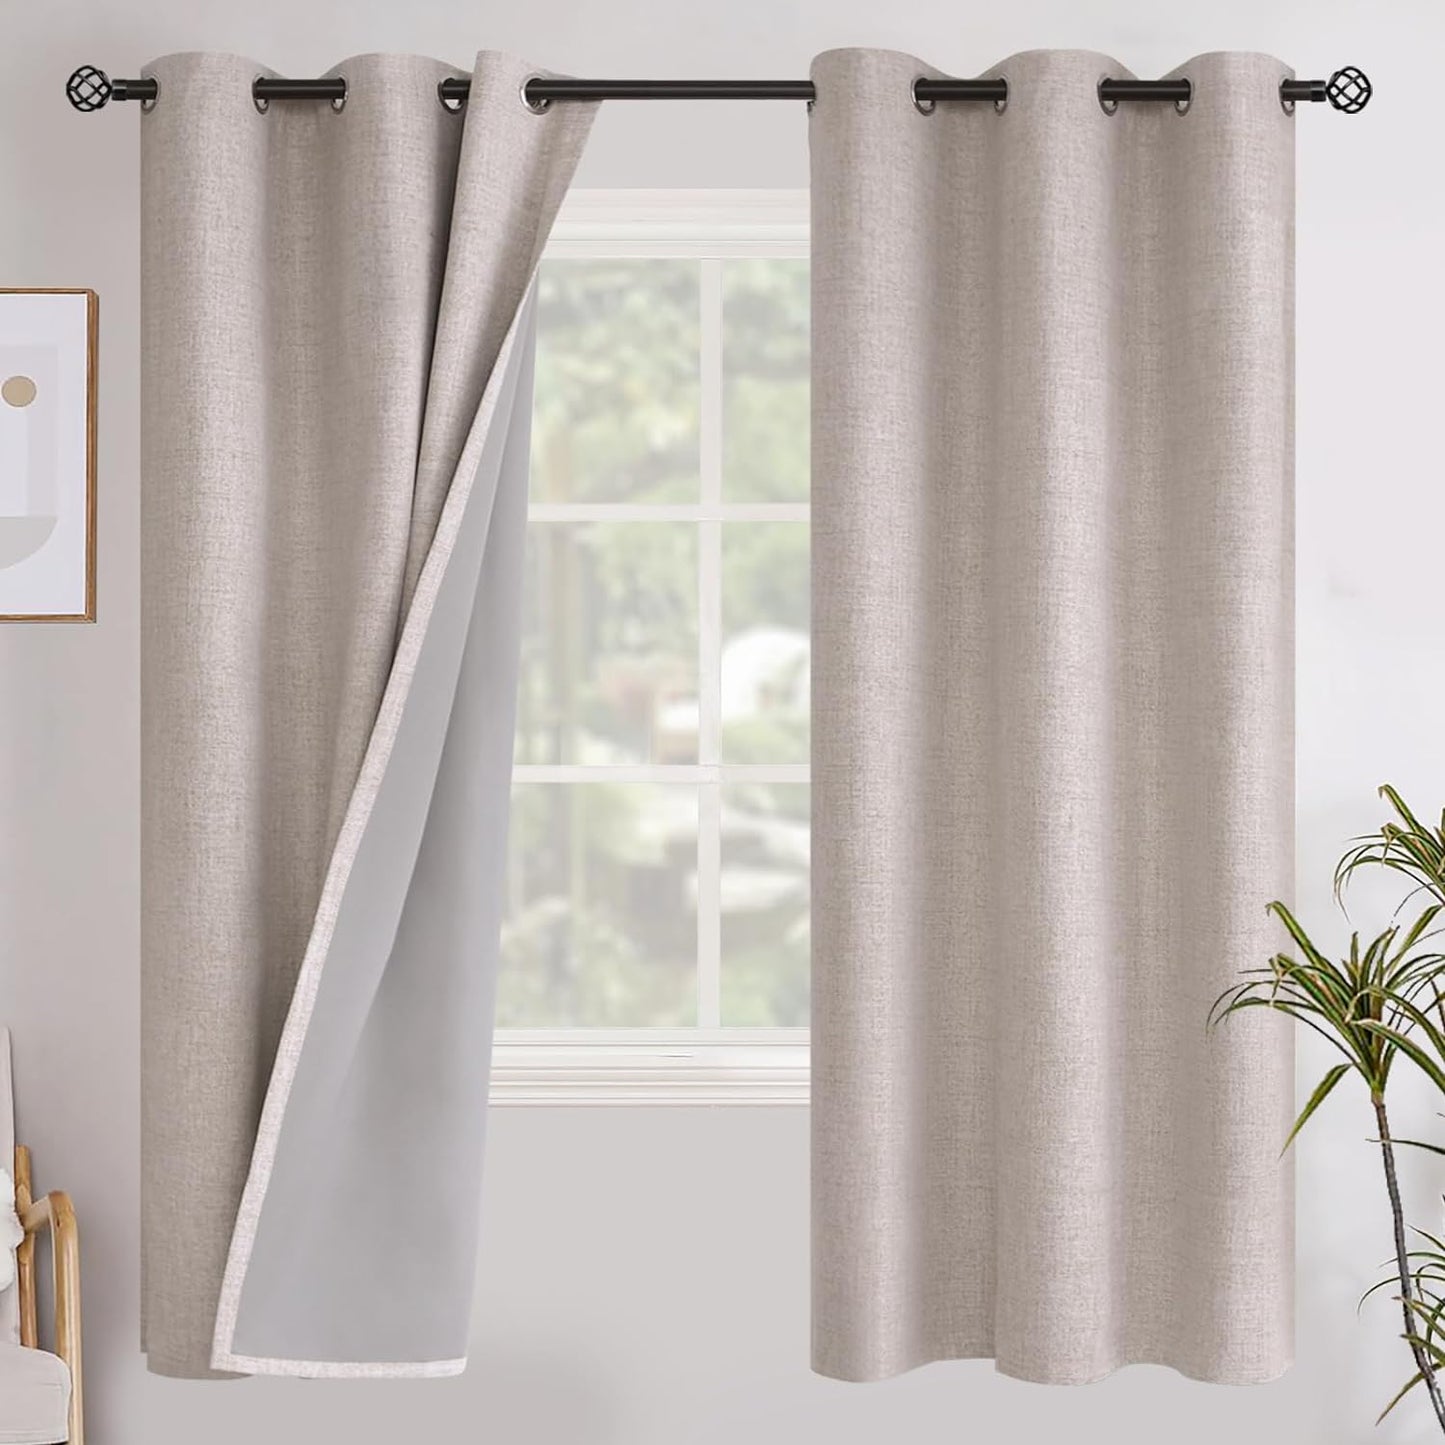 Youngstex Linen Blackout Curtains 63 Inch Length, Grommet Darkening Bedroom Curtains Burlap Linen Window Drapes Thermal Insulated for Basement Summer Heat, 2 Panels, 52 X 63 Inch, Beige  YoungsTex Beige 42W X 72L 